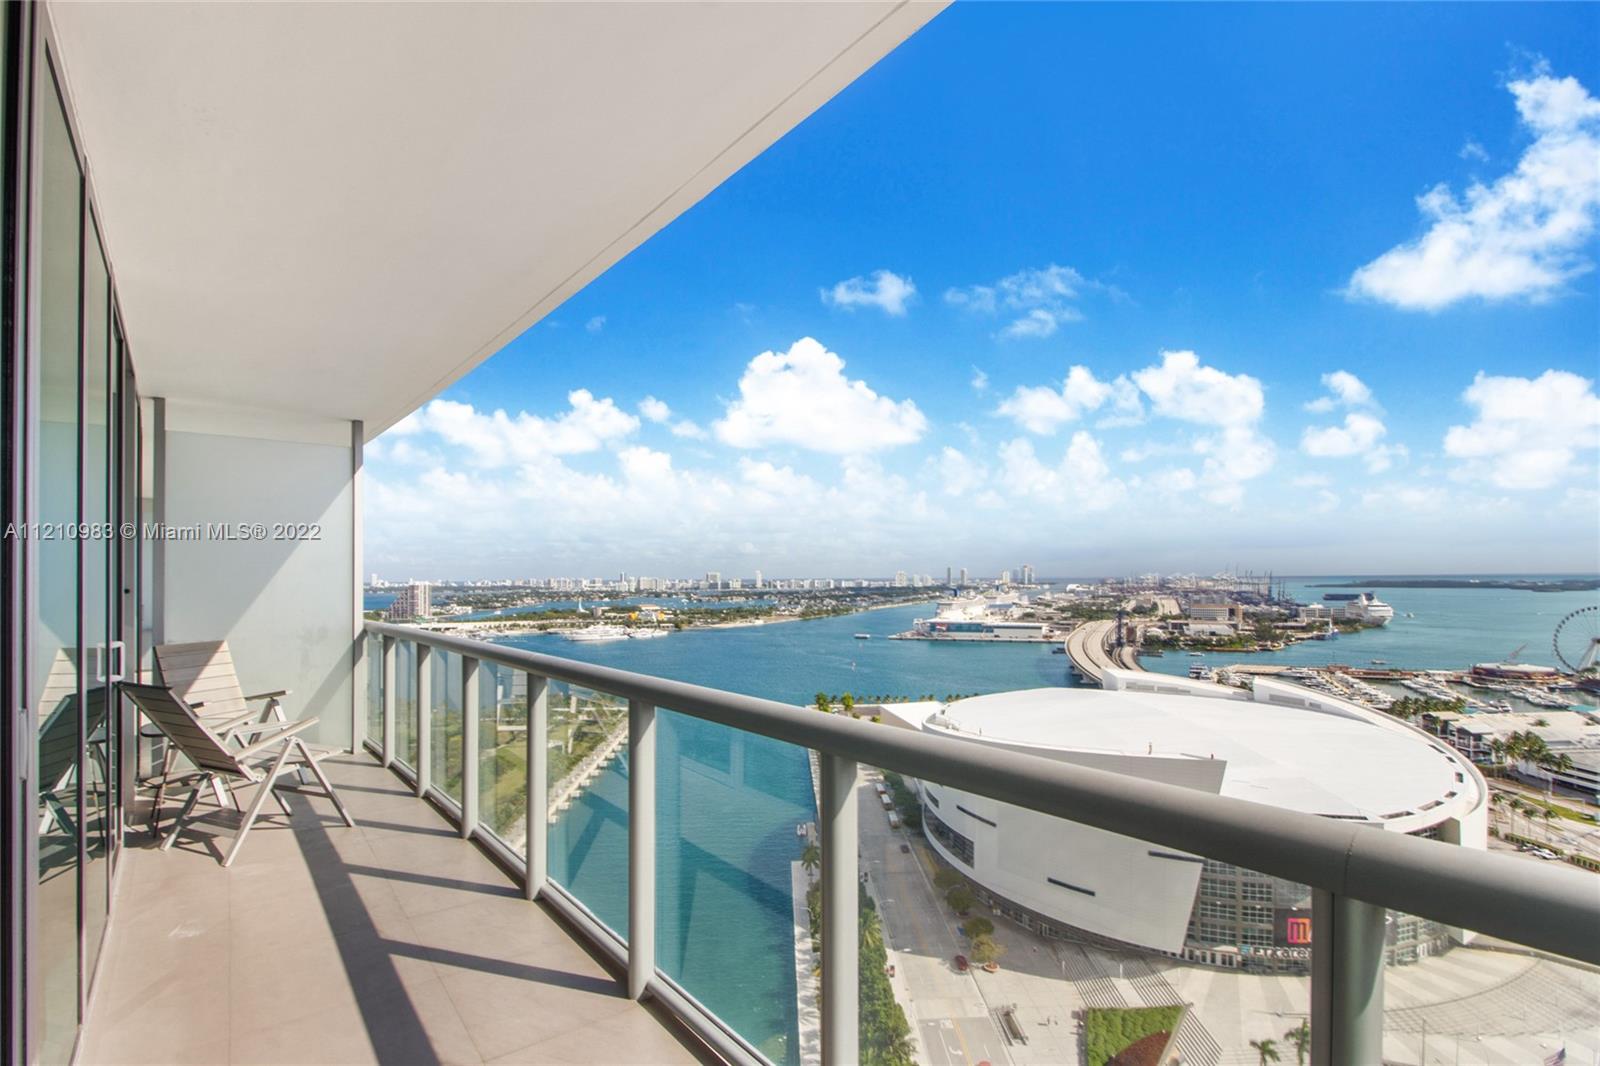 AMAZING UNIT! Modern & Chic Luxury living at its best Large 2 bedroom/2 bath + den/third bed at Marina Blue in the heart of Miami. Breathtaking, Endless & Panoramic views of Biscayne Bay & Downtown Miami. Marina Blue condominium is walking distance to all Miami Downtown Activities. American Airlines Arena , Bayside, & the Arscht Performing Arts Center, 5 minute drive to South Beach. This unit is designer decorated with many upgrades & built-ins with a large terrace, S/S appliances, glass tiled kitchen backsplash and wine cooler. One assigned parking.